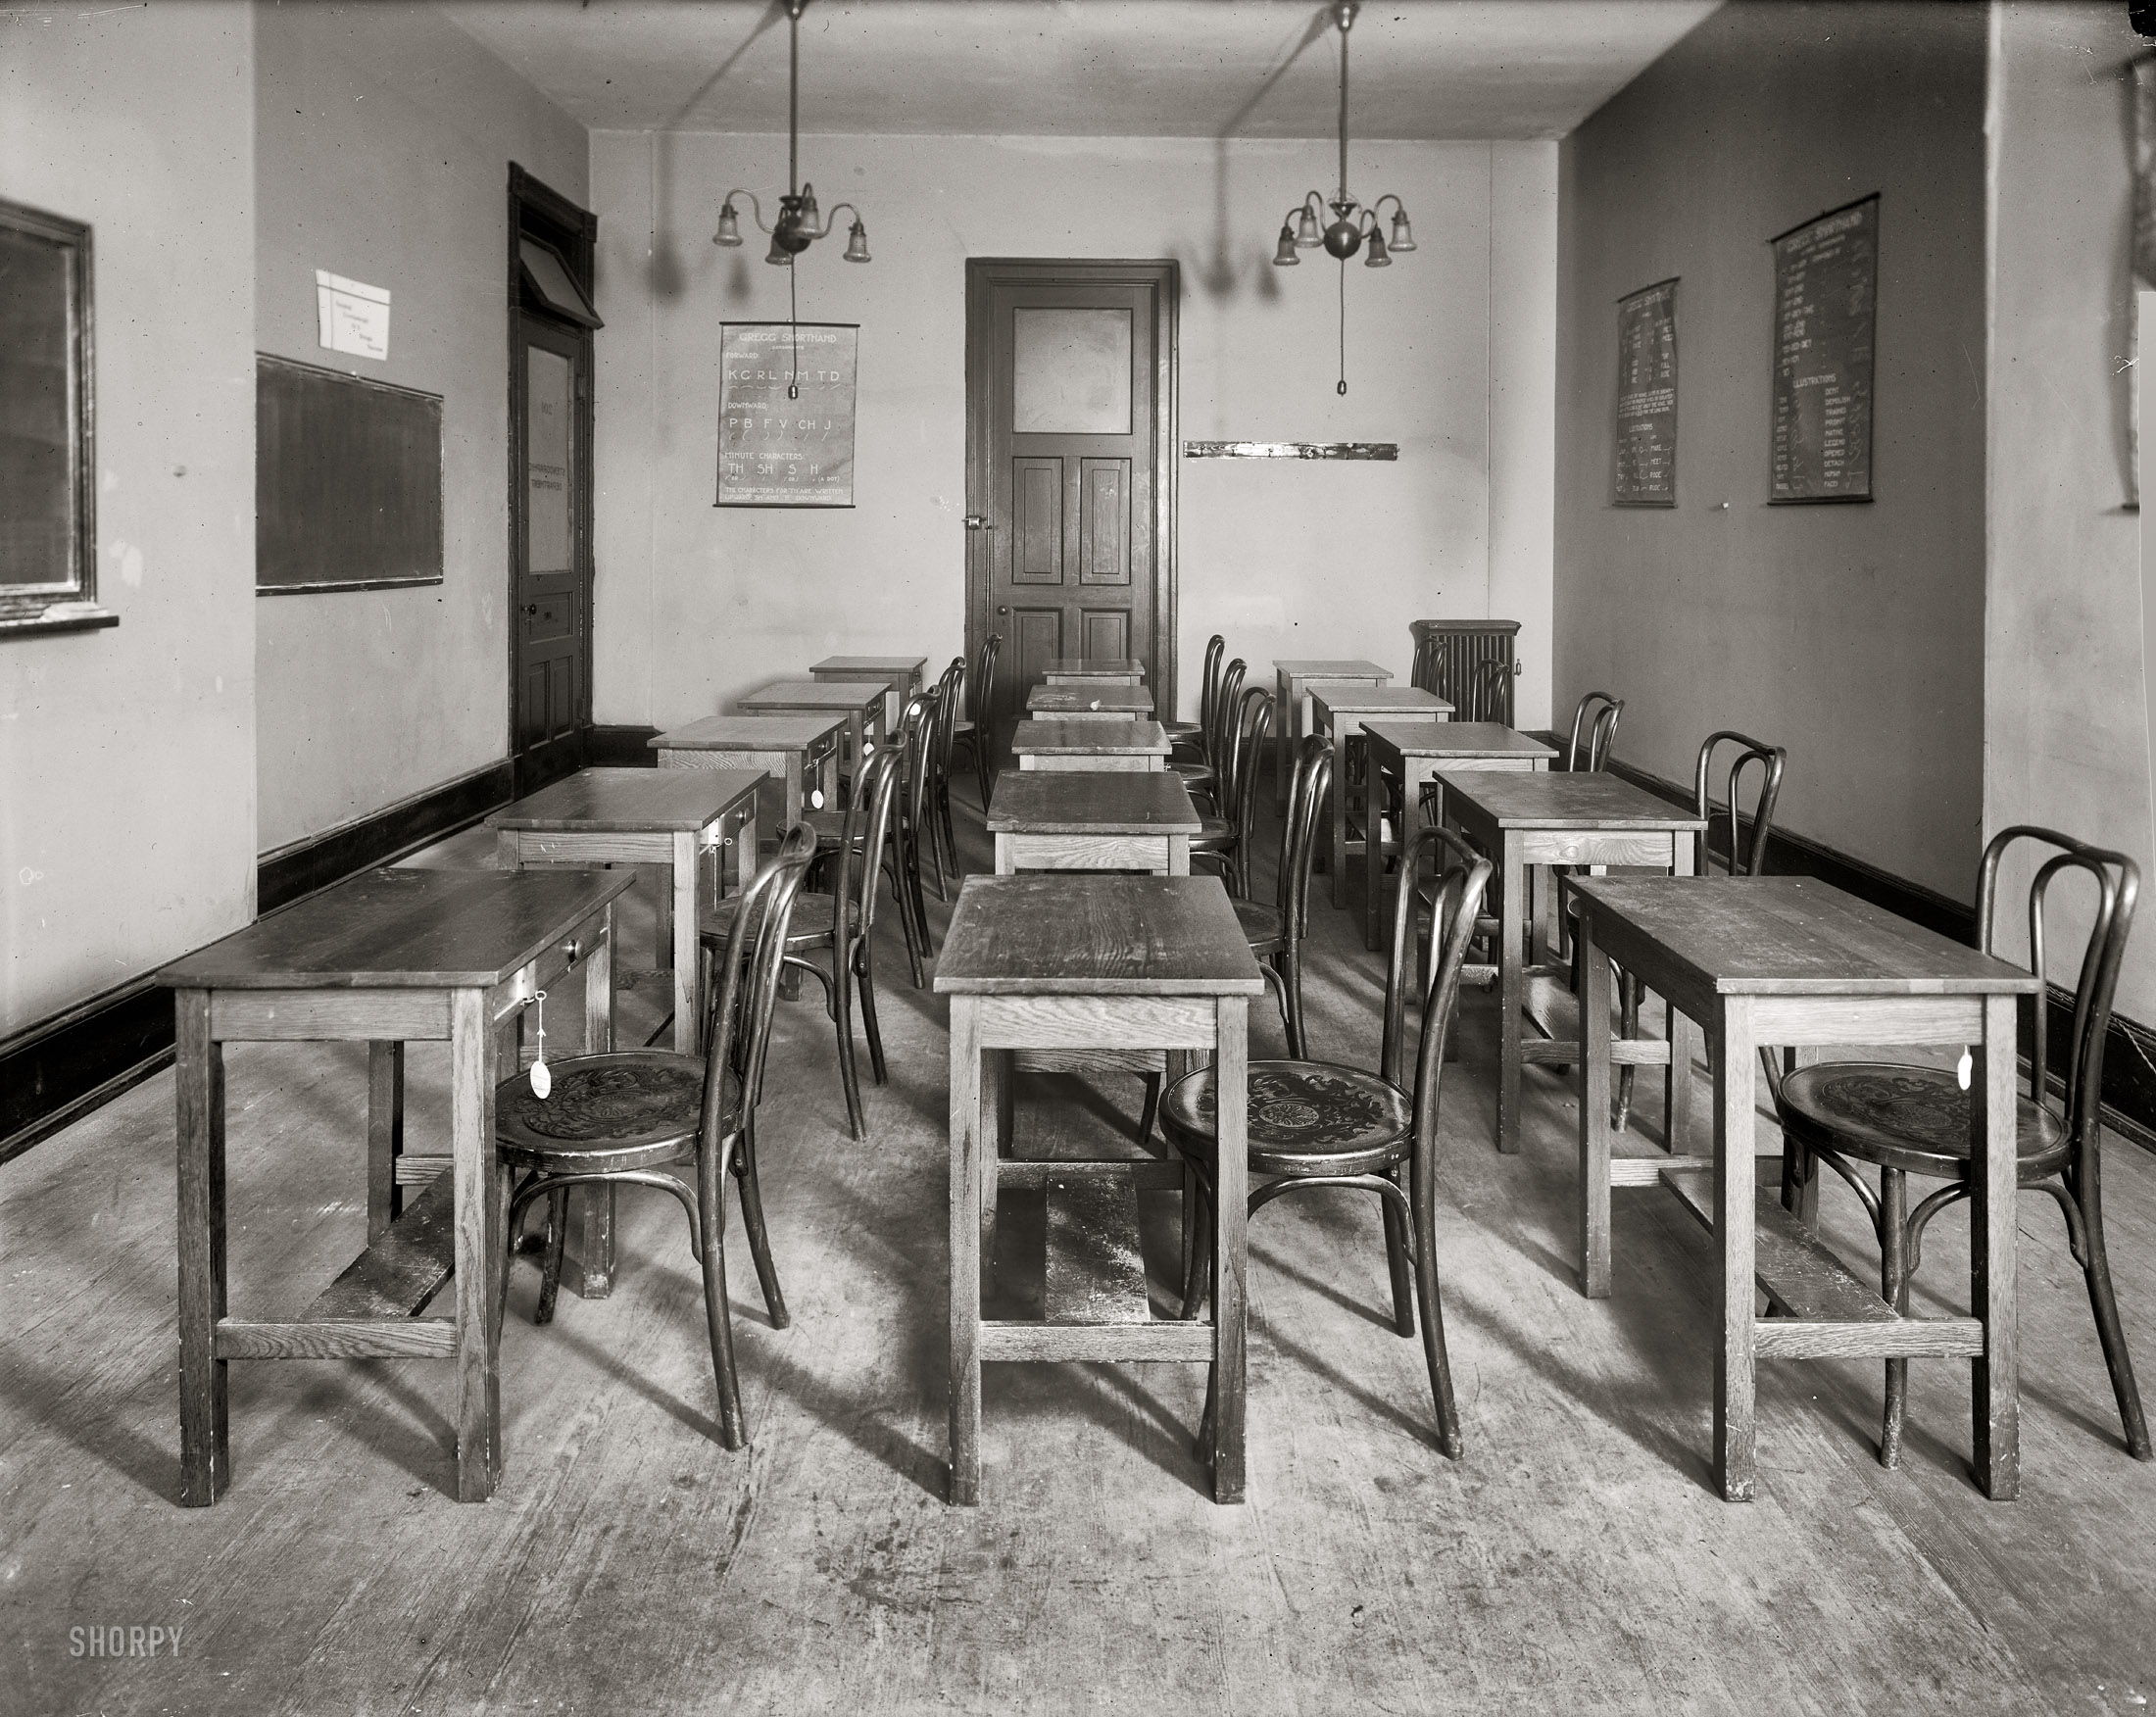 1920. "Washington School for Secretaries classroom." Our second look at the school's facilities. Harris & Ewing Collection glass negative. View full size.